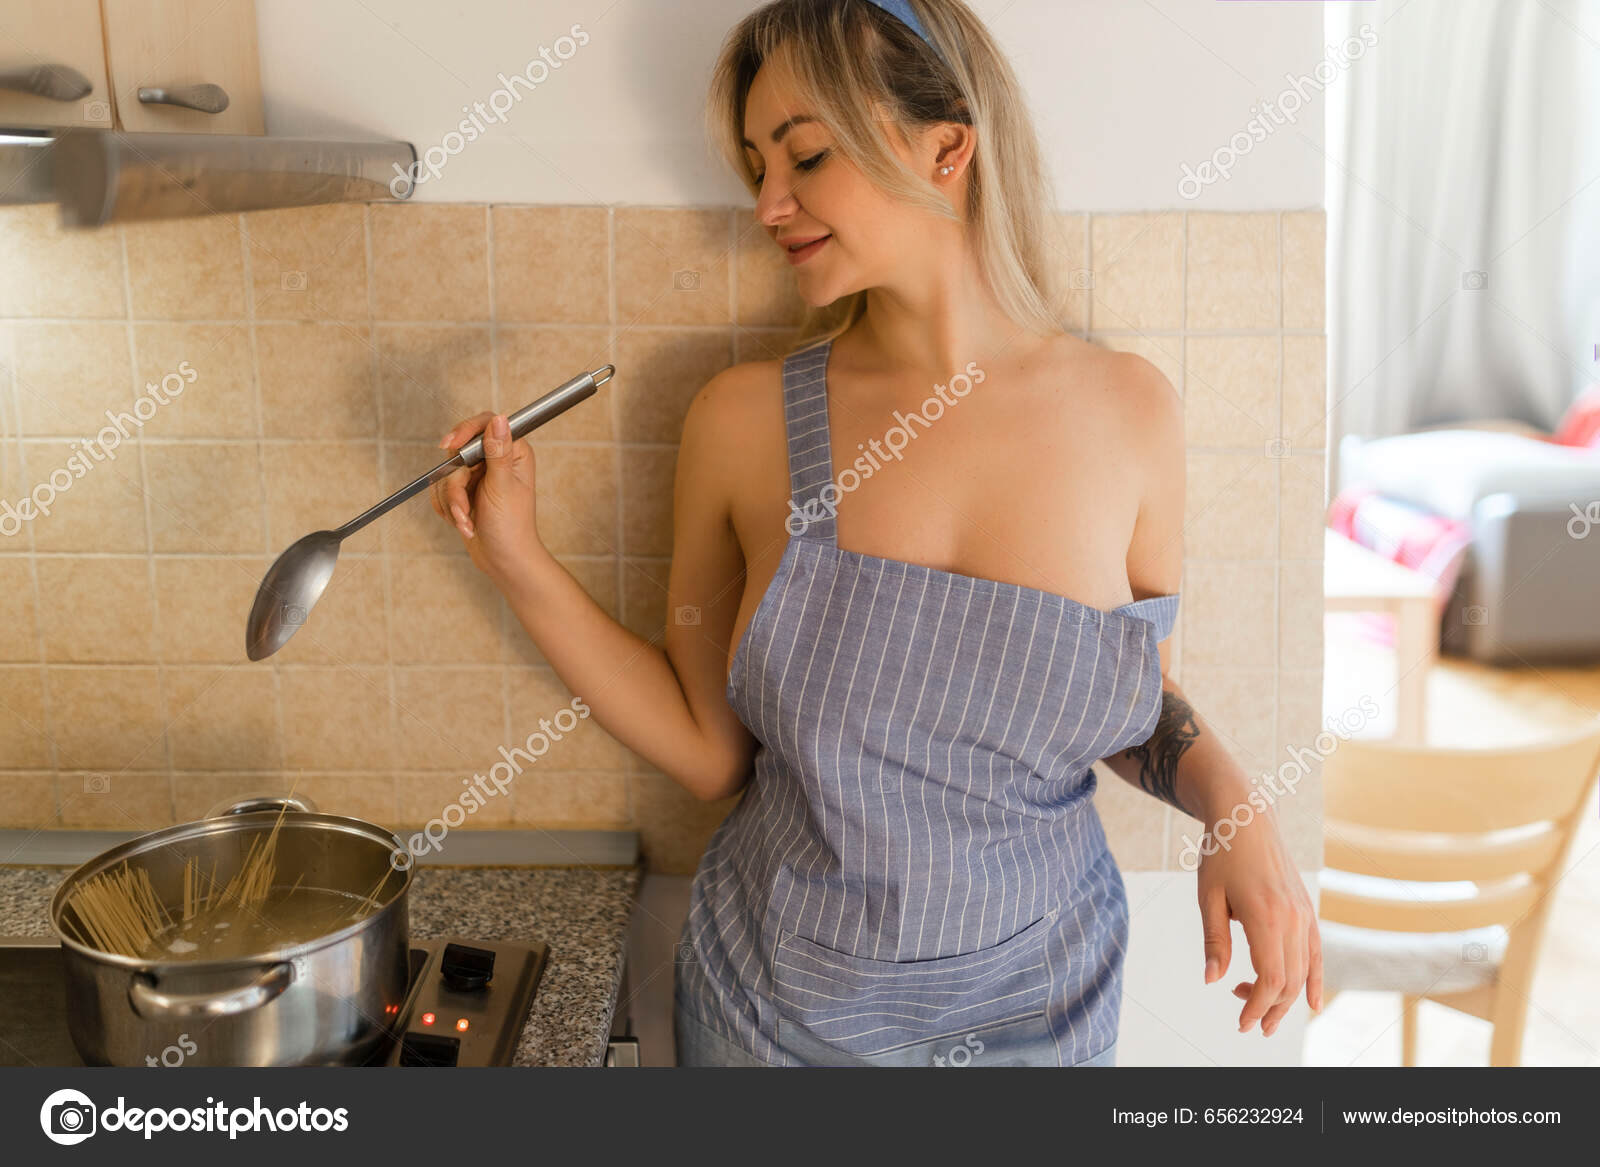 Sexy Girl Apron Big Breasts Cooking Stock Photo by ©redjy_r 656232924